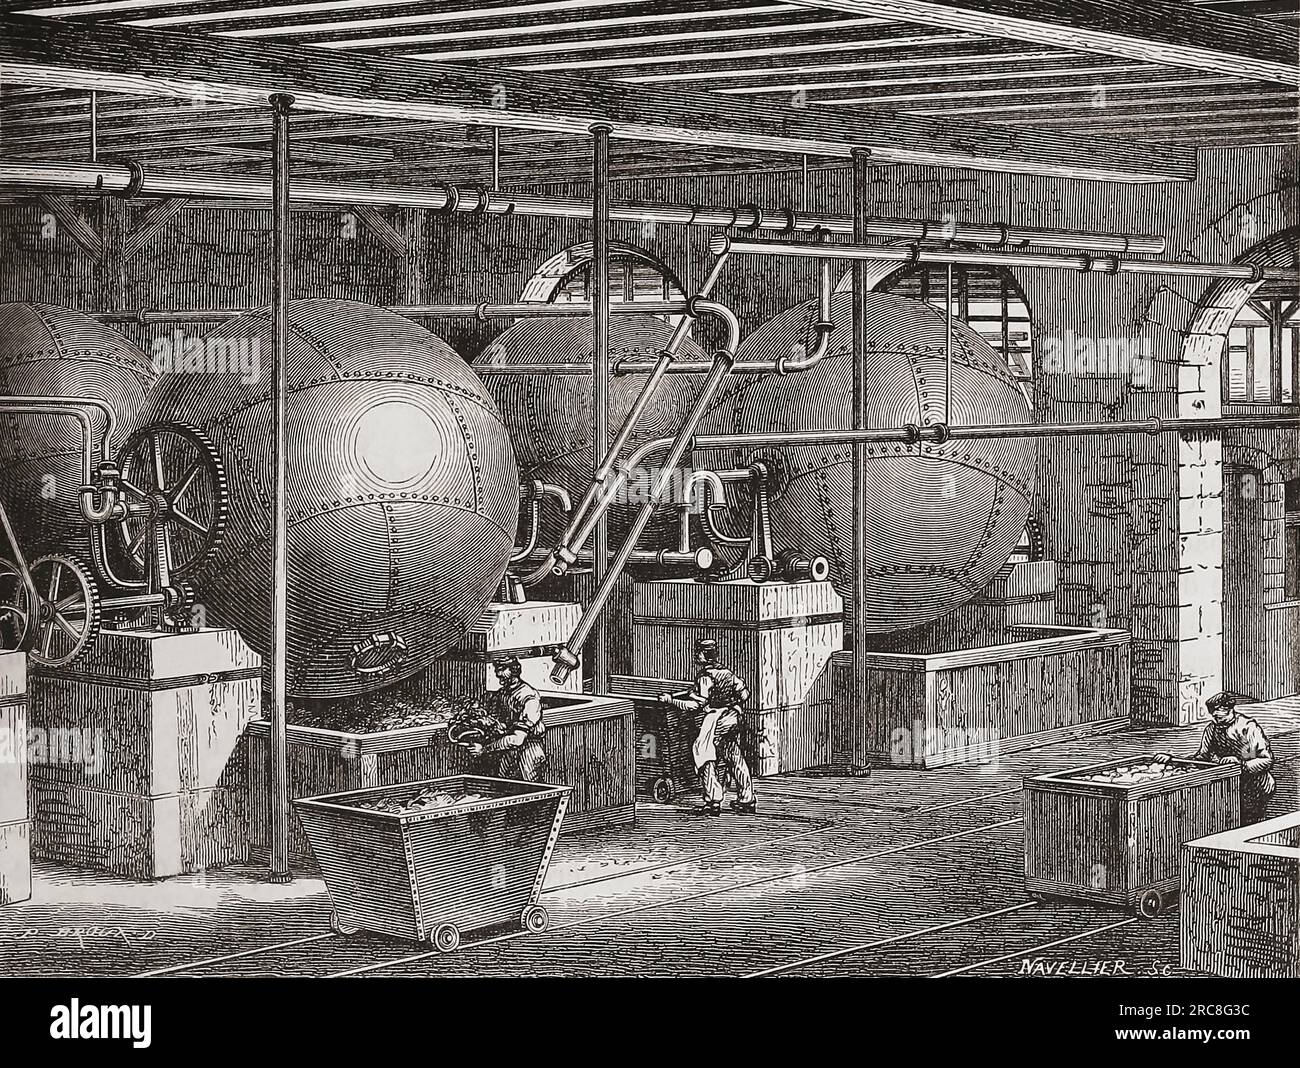 19th century cylindrical rotary boilers processing rags for rag paper.  After an illustration in Les merveilles de l'industrie, by Louis Figuier, published 1877. Stock Photo